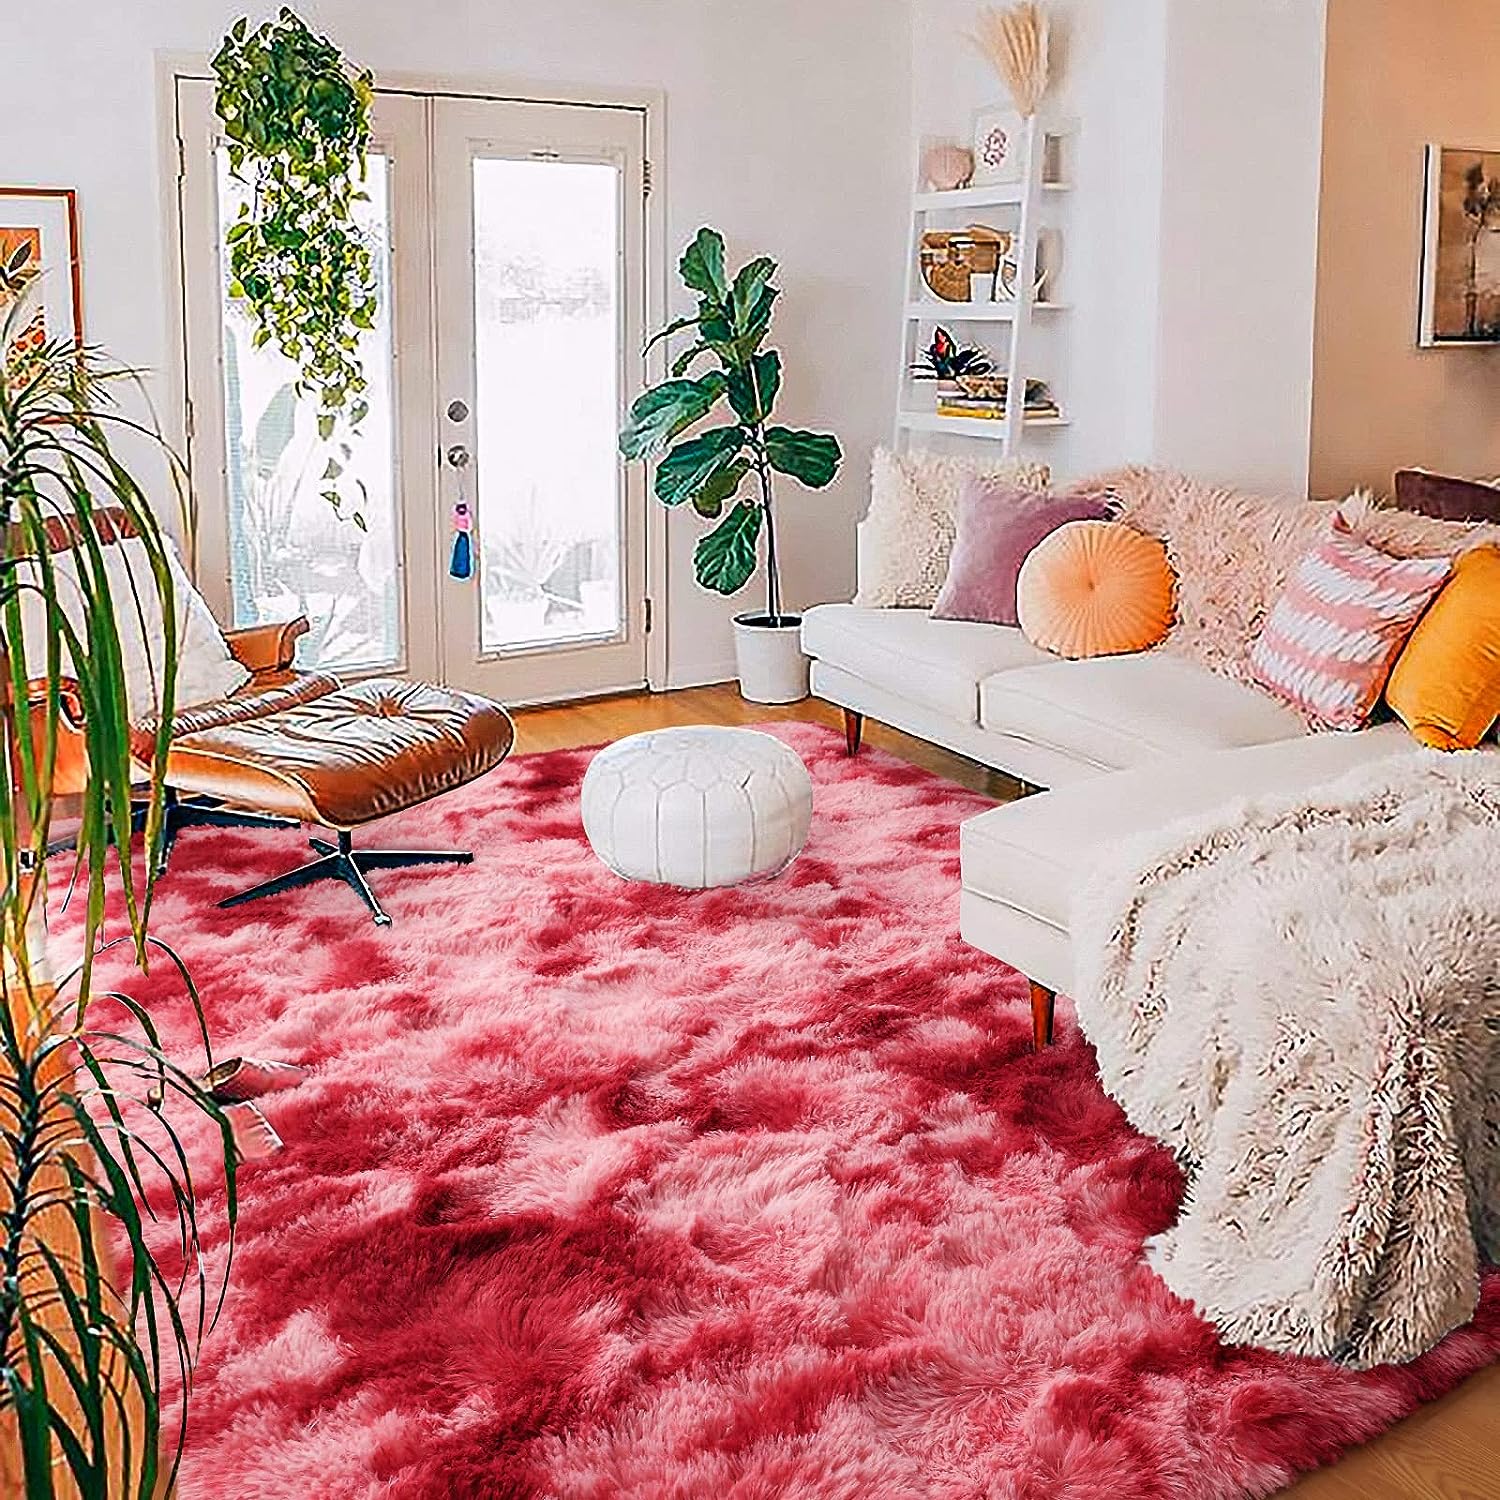 red rug in living room